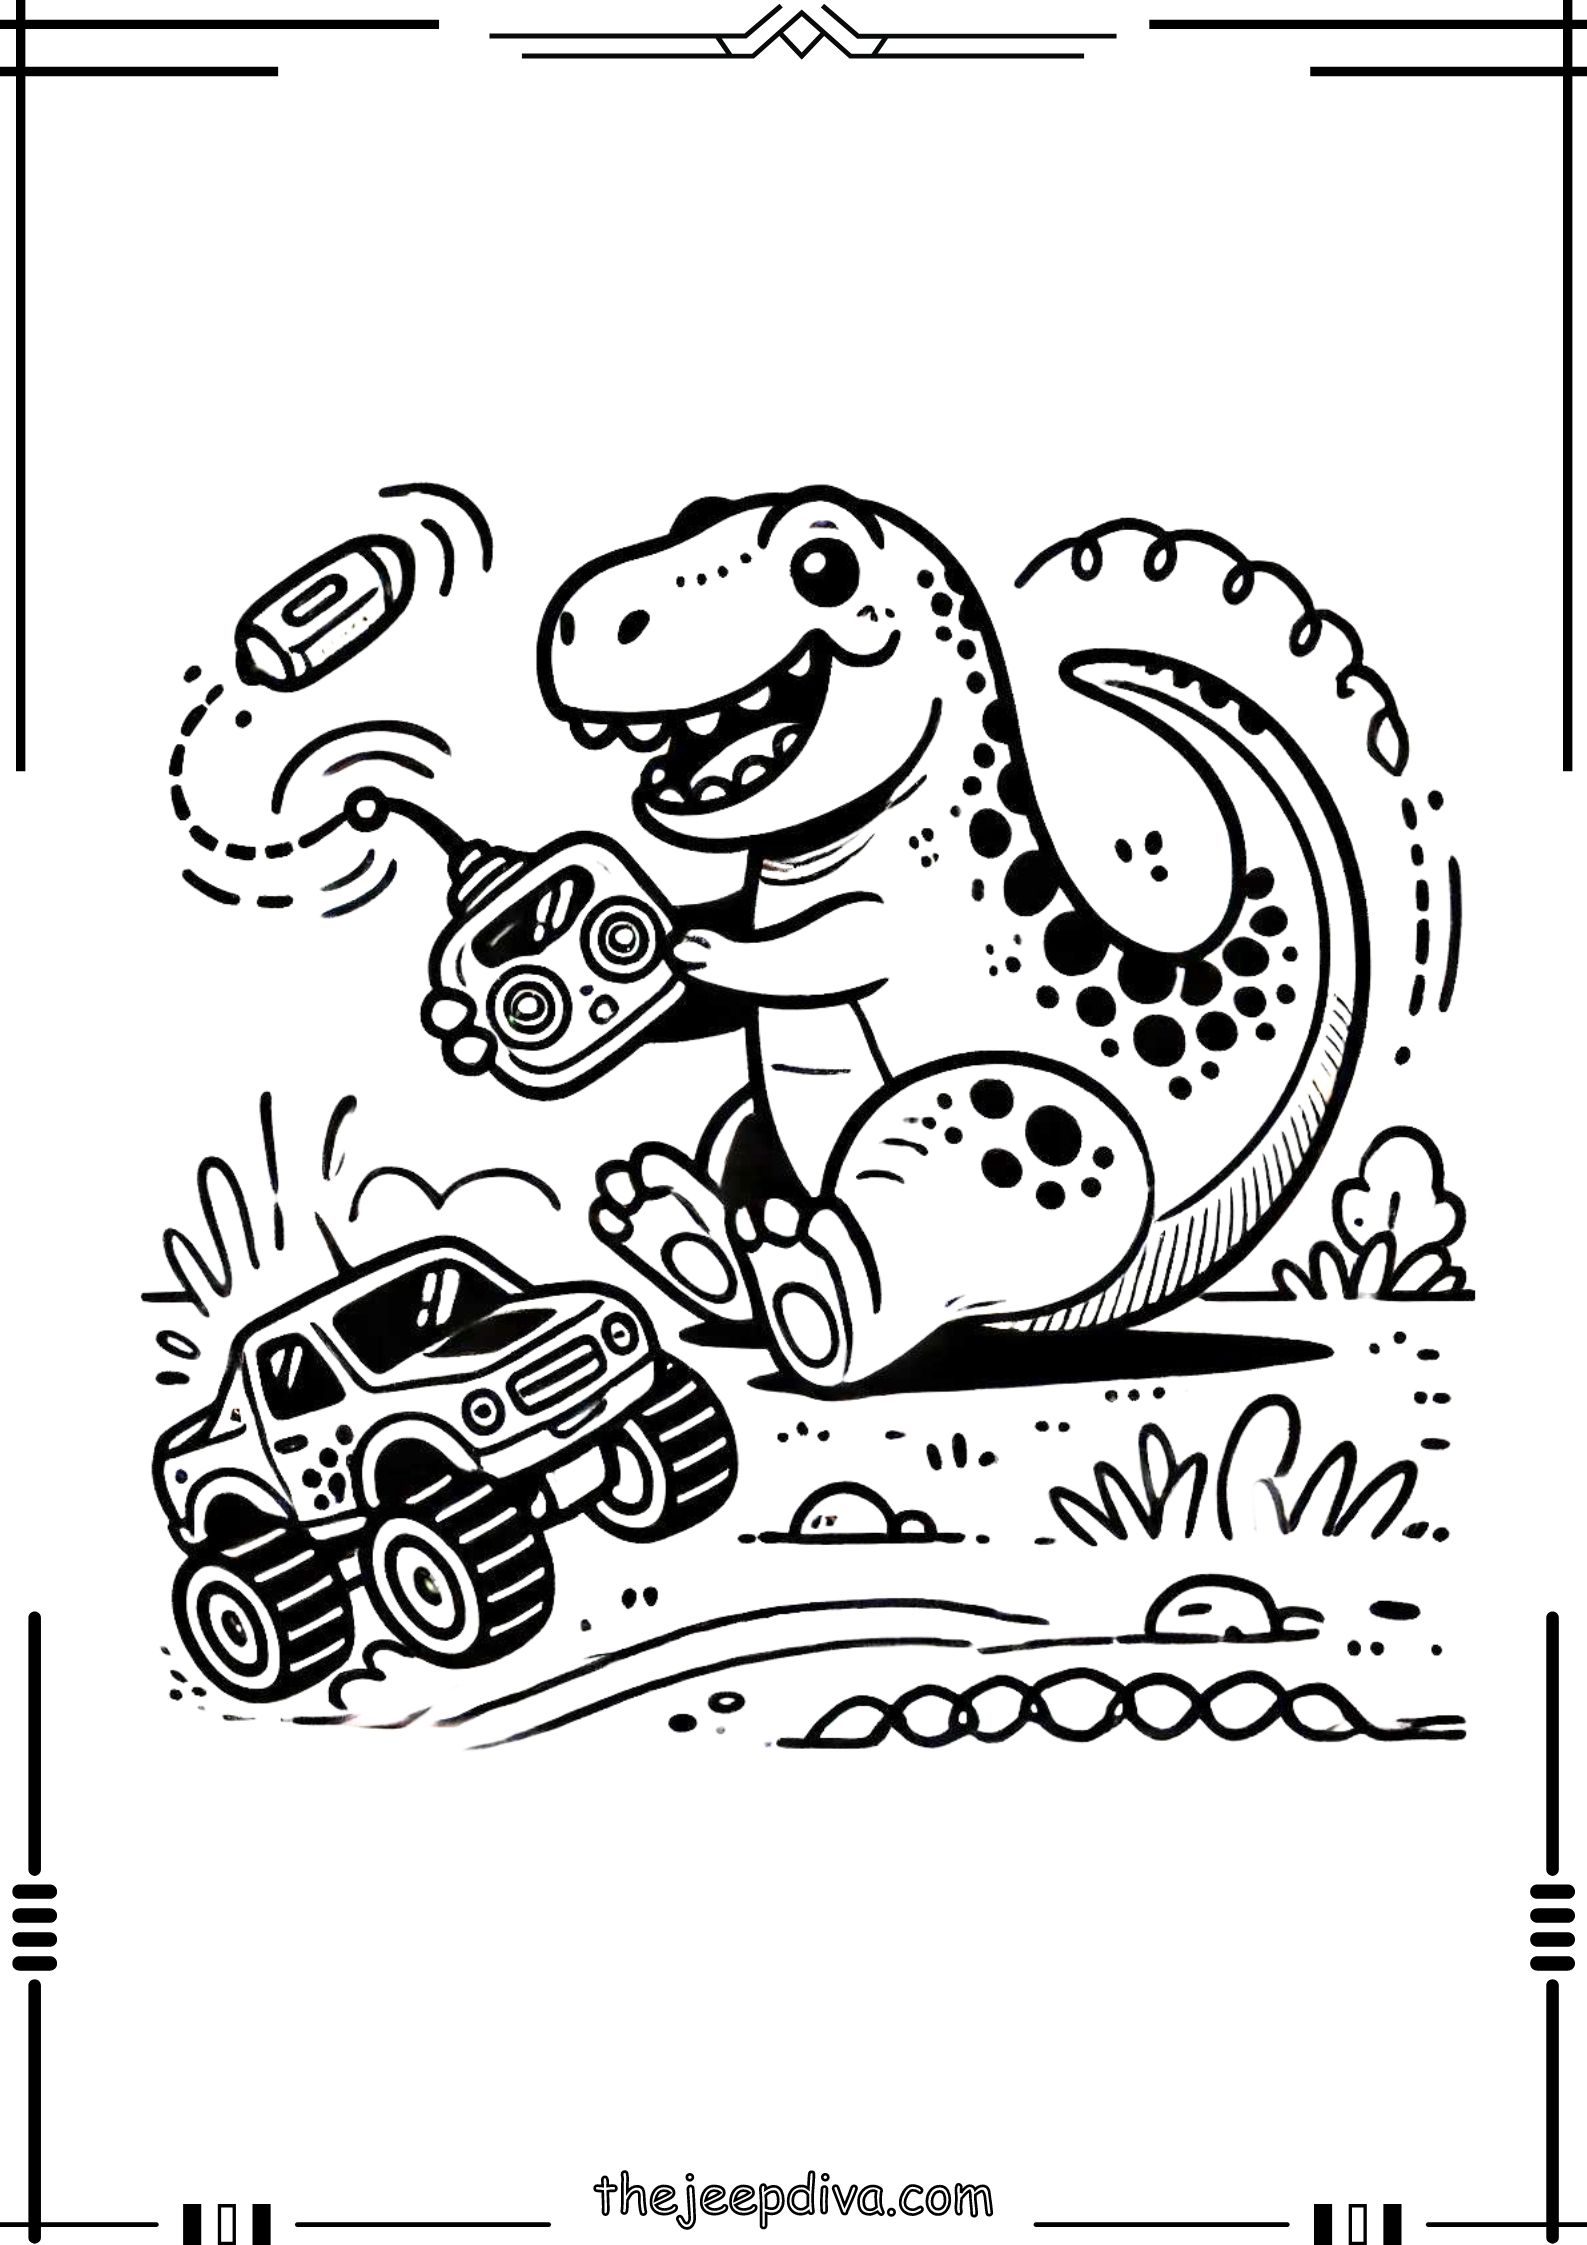 Dinosaur-Colouring-Pages-Hard-10